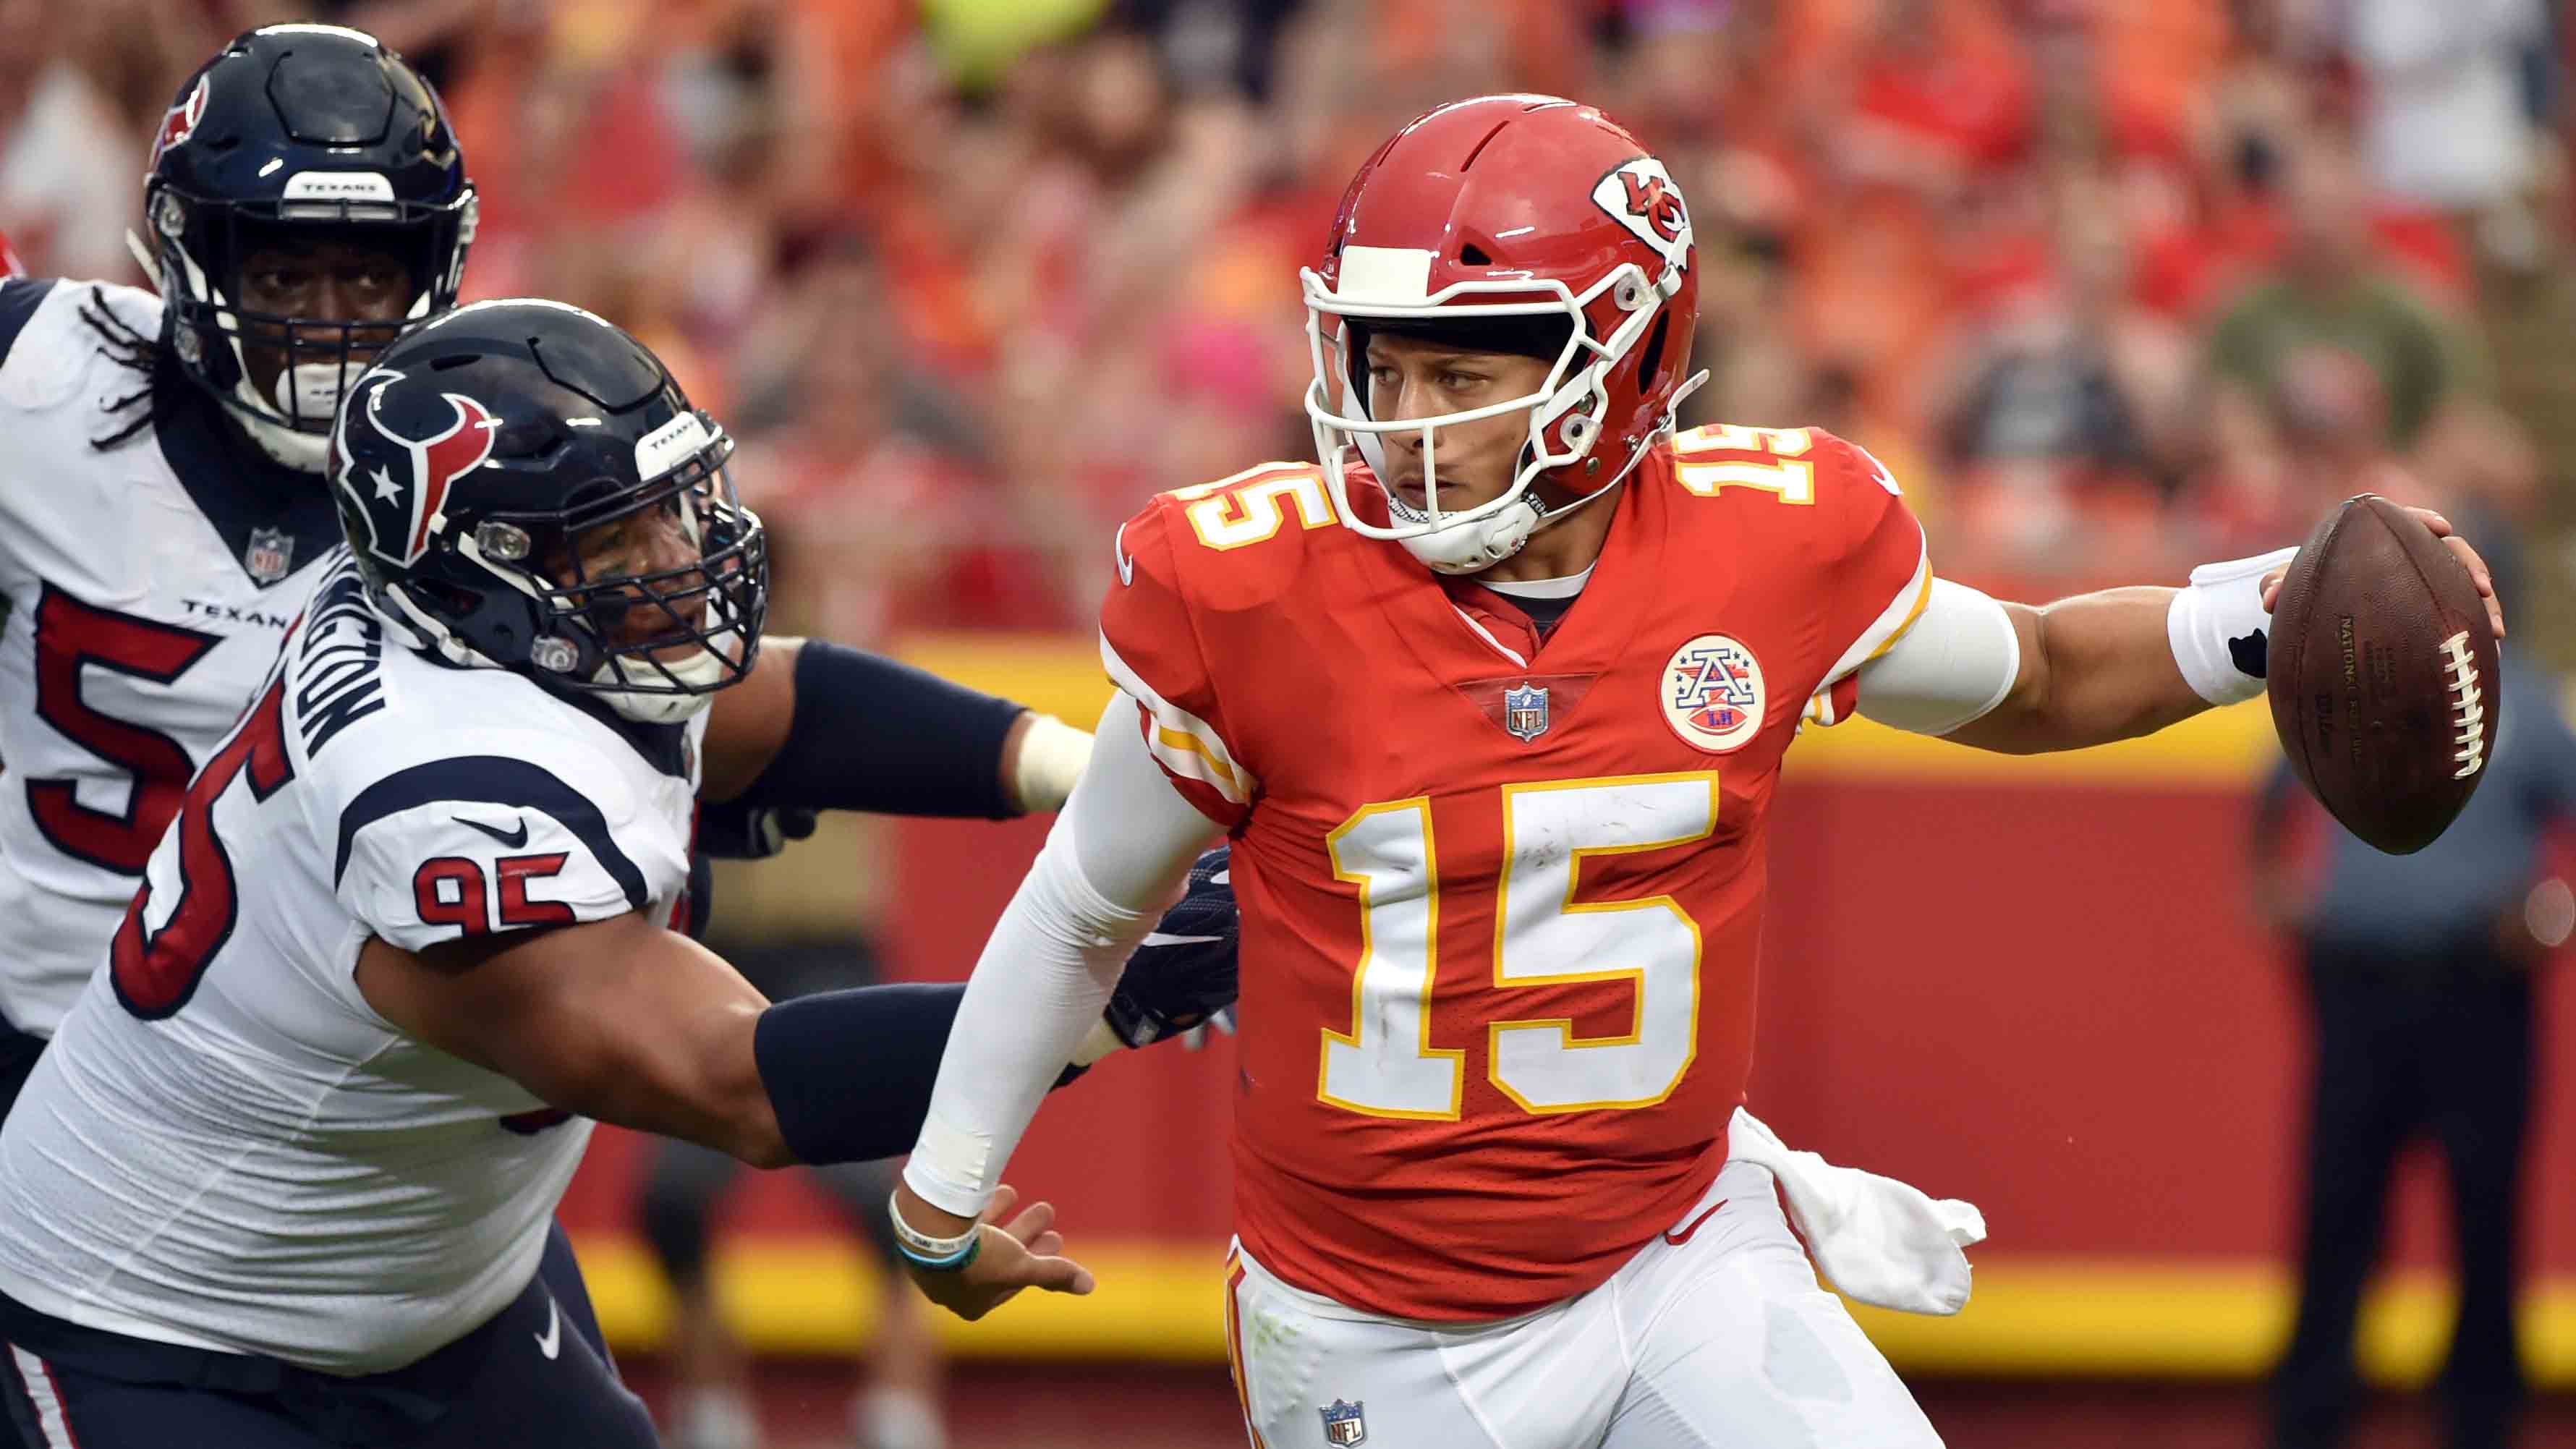 Mahomes off to a decent start, but Chiefs fall 17-10 to Texans